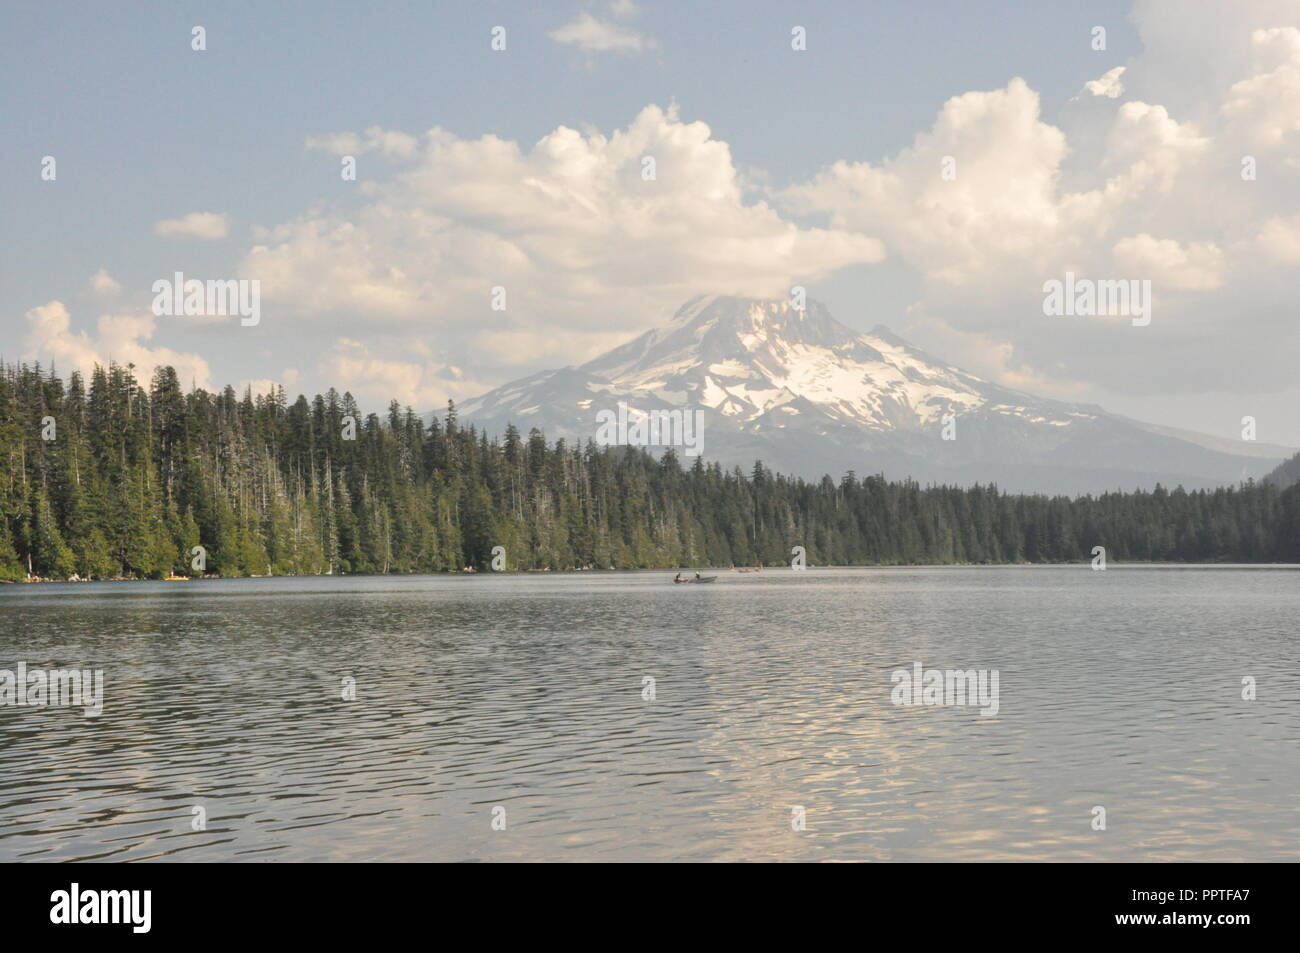 A view of Mt. Hood from the shore of Lost Lake Resort and Camp Ground in Mt. Hood National Park, located in Hood River, Oregon. Stock Photo